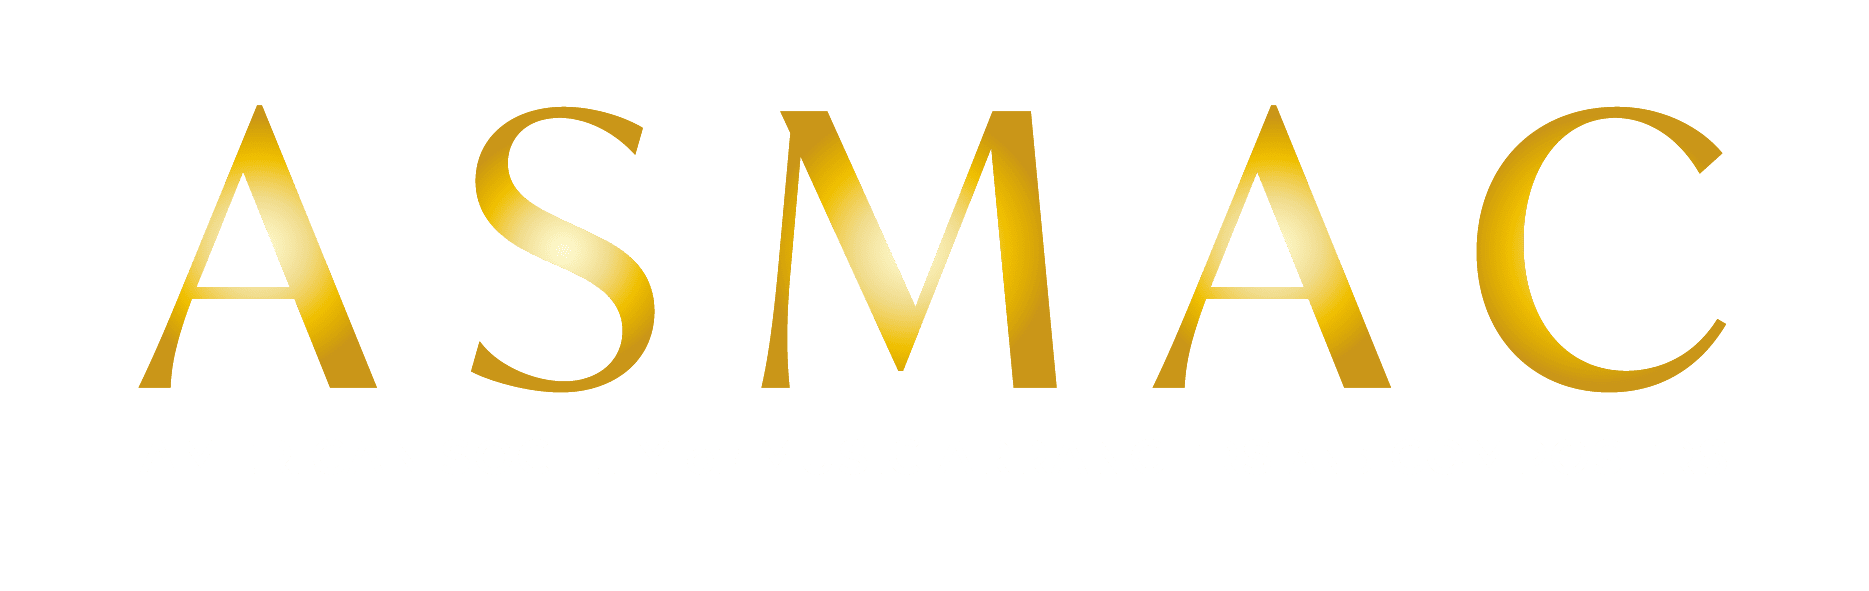 ASMAC - American Society of Music Arrangers and Composers